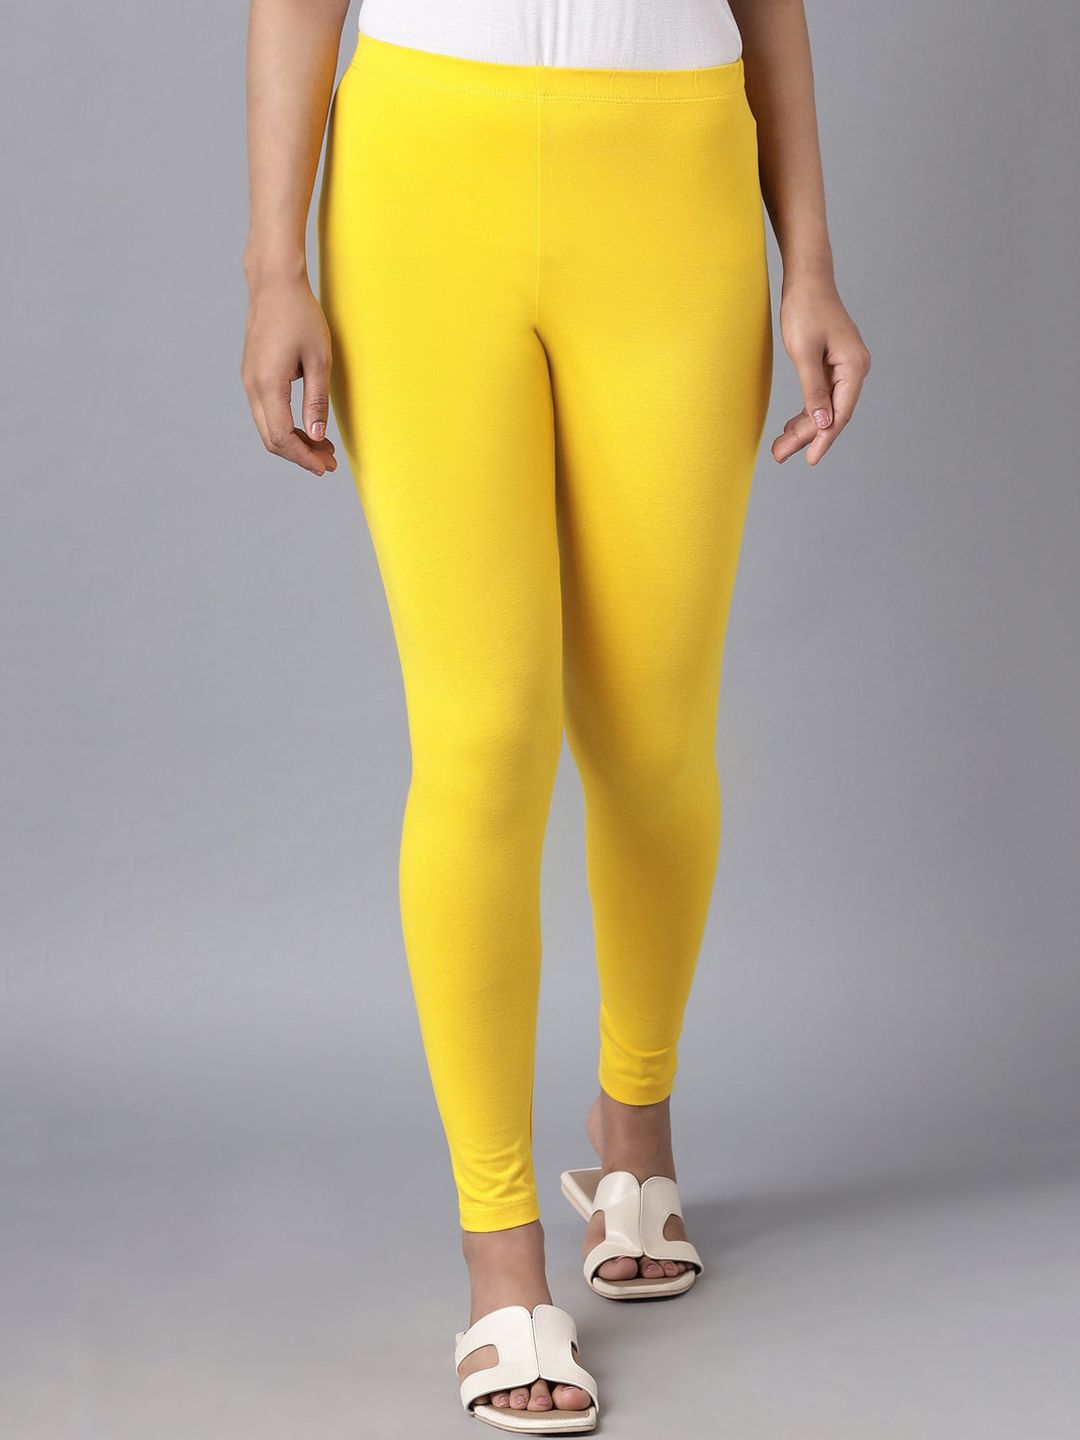 elleven Women Yellow Ankle Length Leggings Price in India